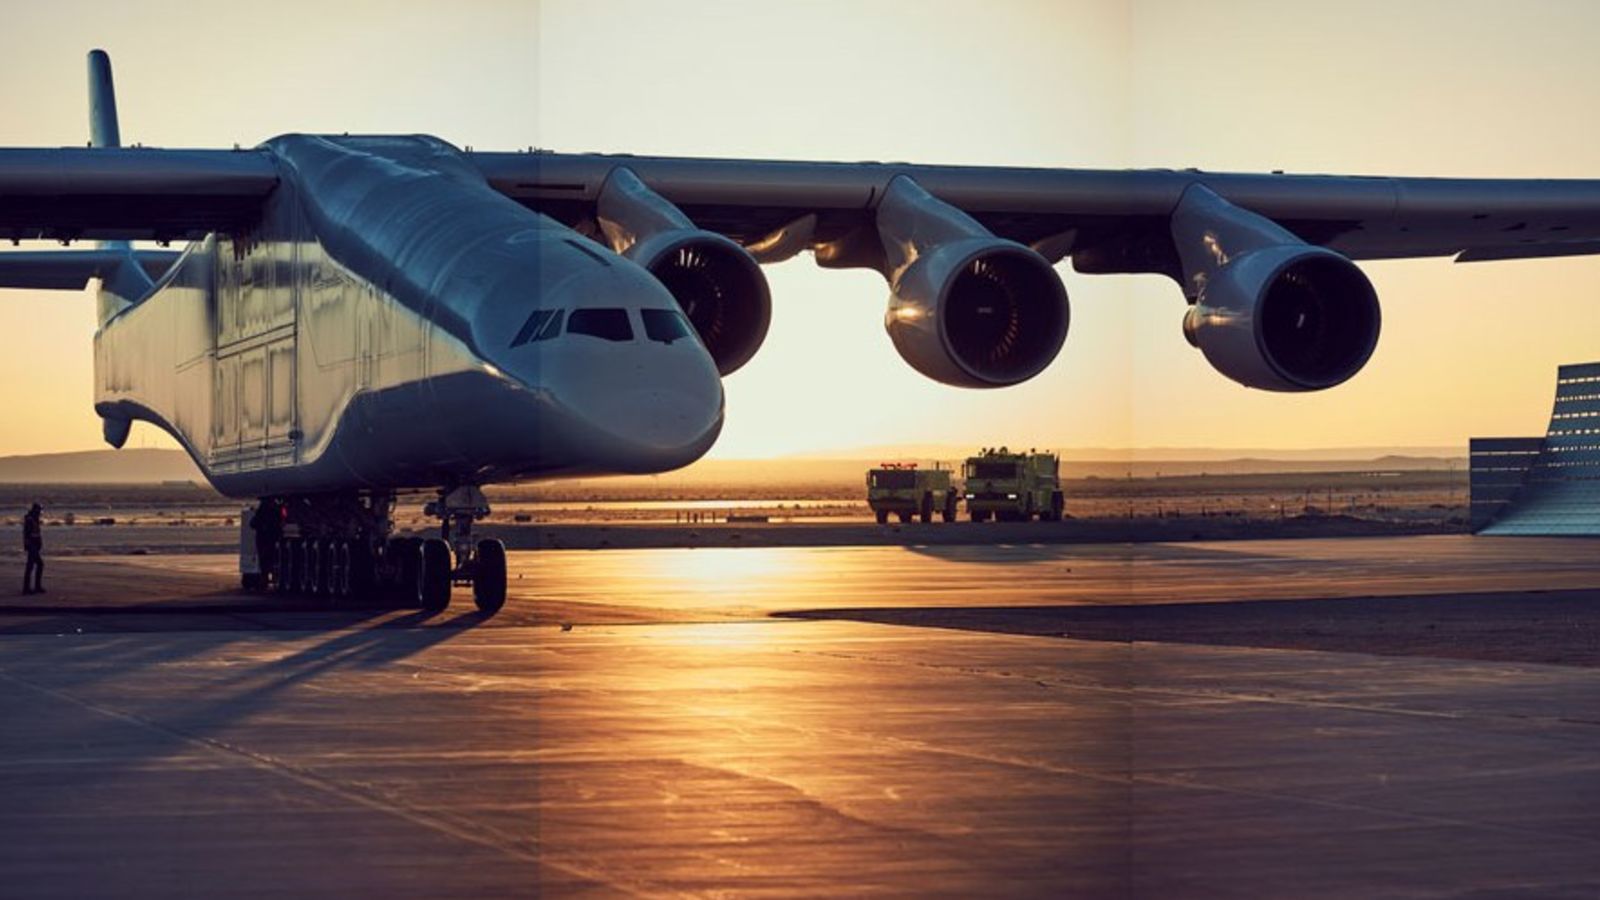 Illustration for article titled Stratolaunch